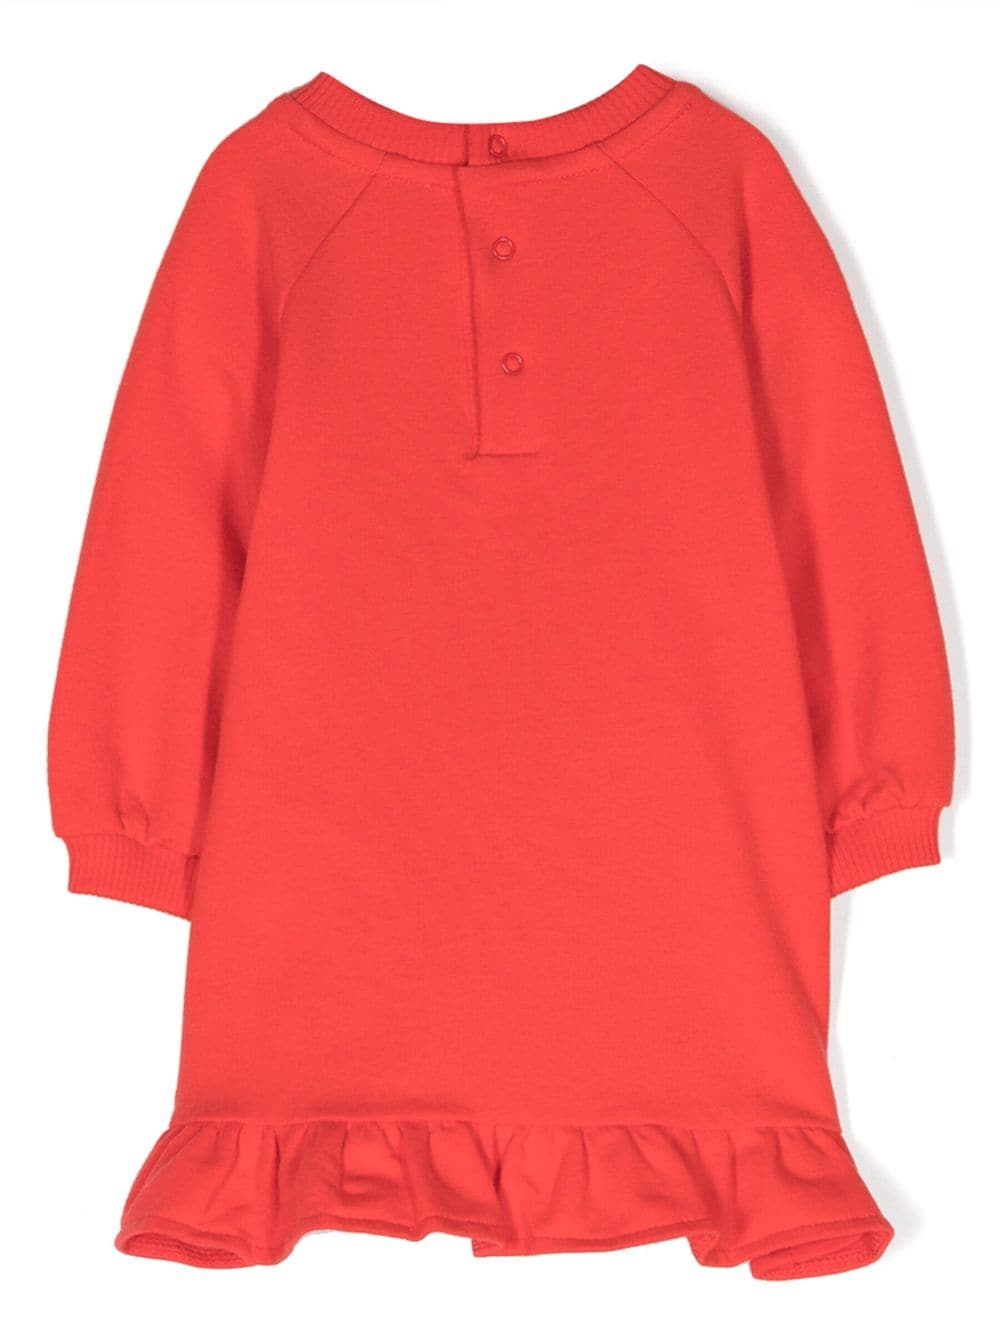 Red dress for baby girls with bear